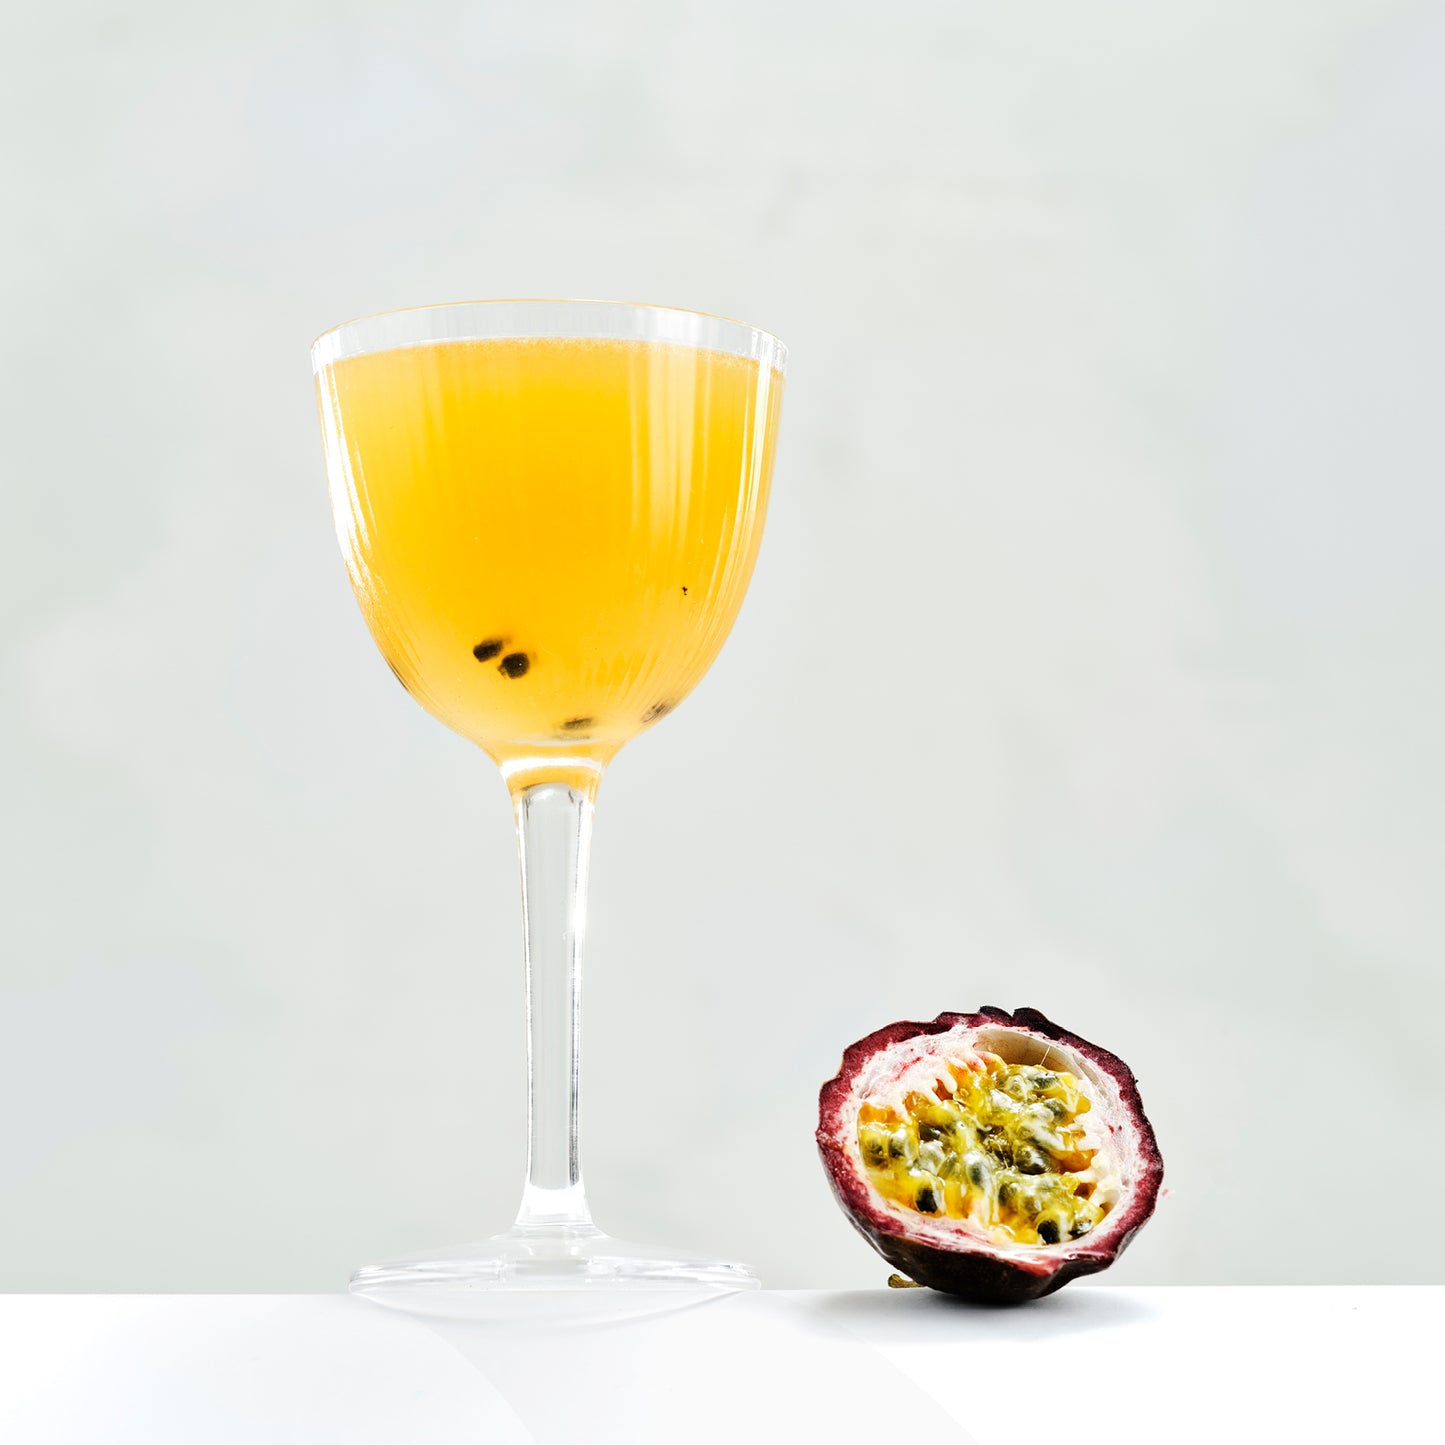 AB's Black Label Passionfruit & Lychee Ping Pong